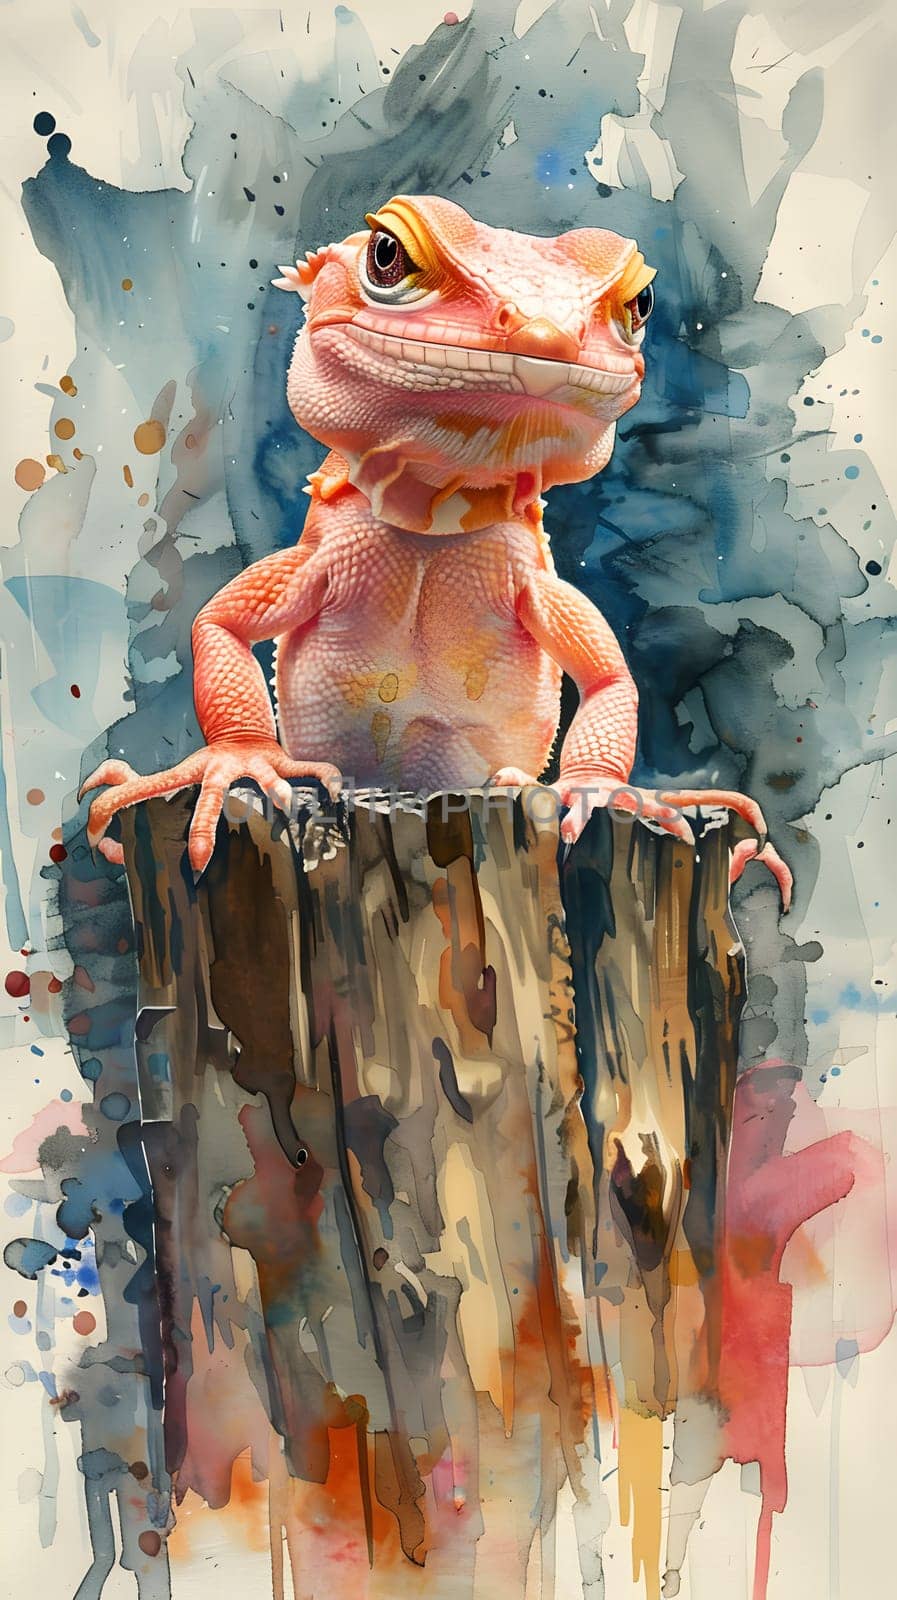 A lizard perched on a wooden post in a watercolor painting by Nadtochiy